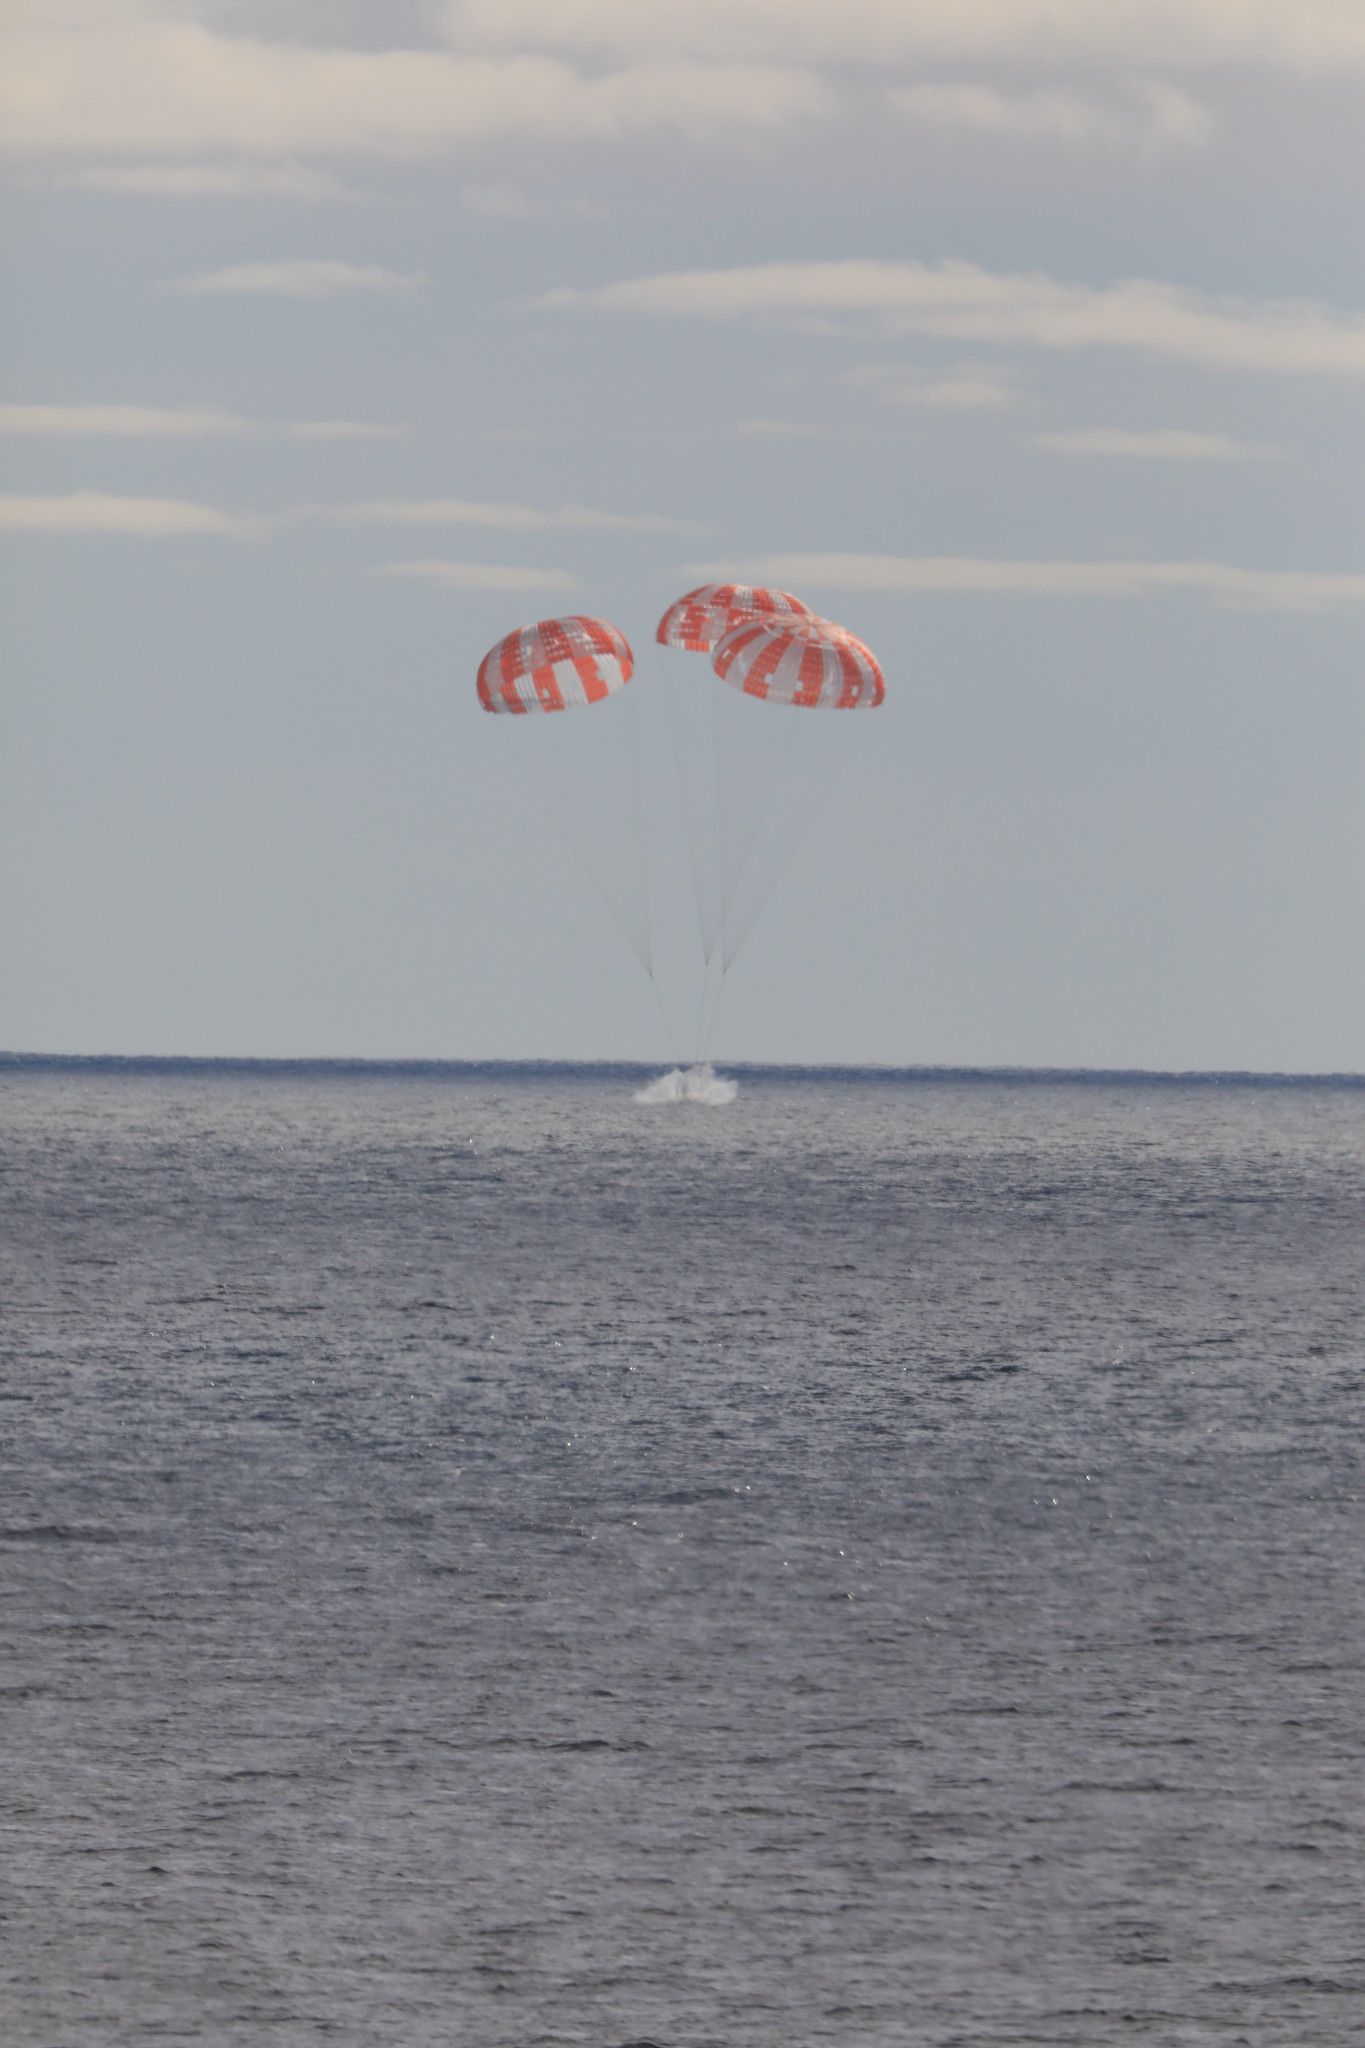 NASA’s Orion spacecraft for the Artemis I mission splashed down in the Pacific Ocean at 9:40 a.m. PST on Sunday, Dec. 11, after a 25.5 day mission to the Moon. 